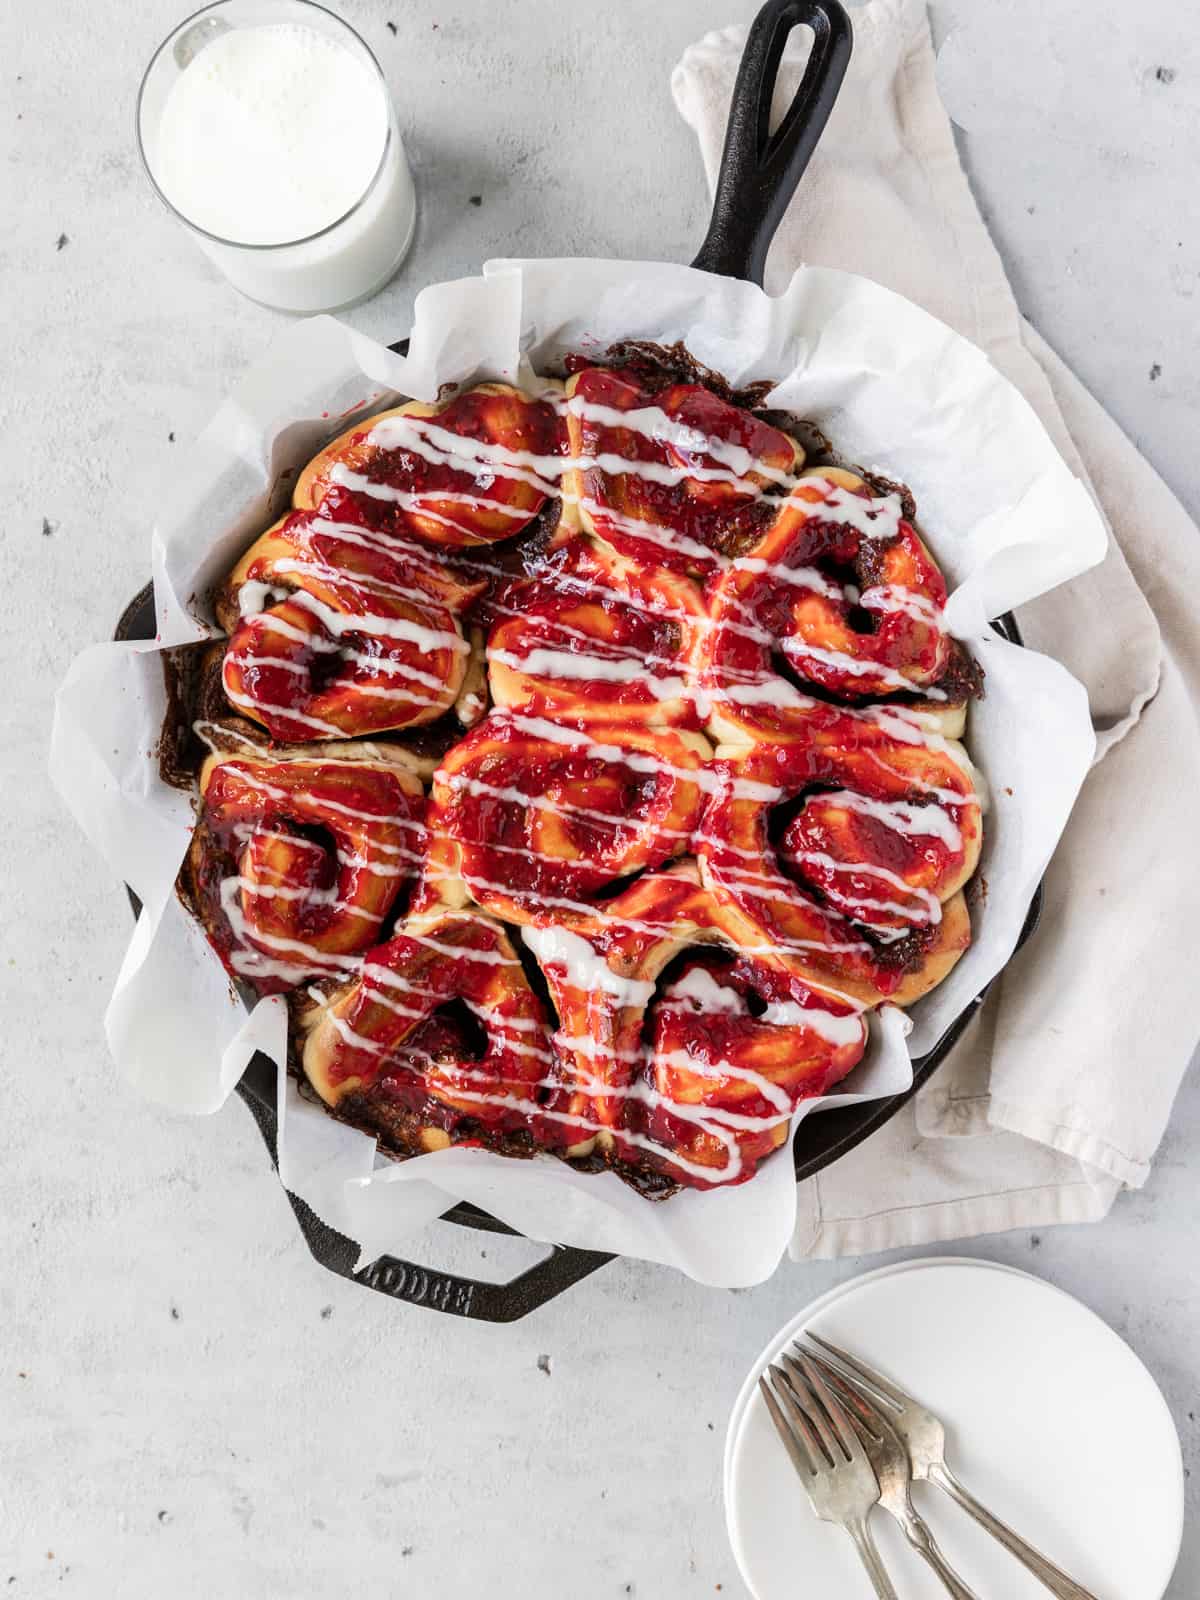 a cast iron dish filled with raspberry cinnamon rolls with a glass of milk and a dish with fork beside it